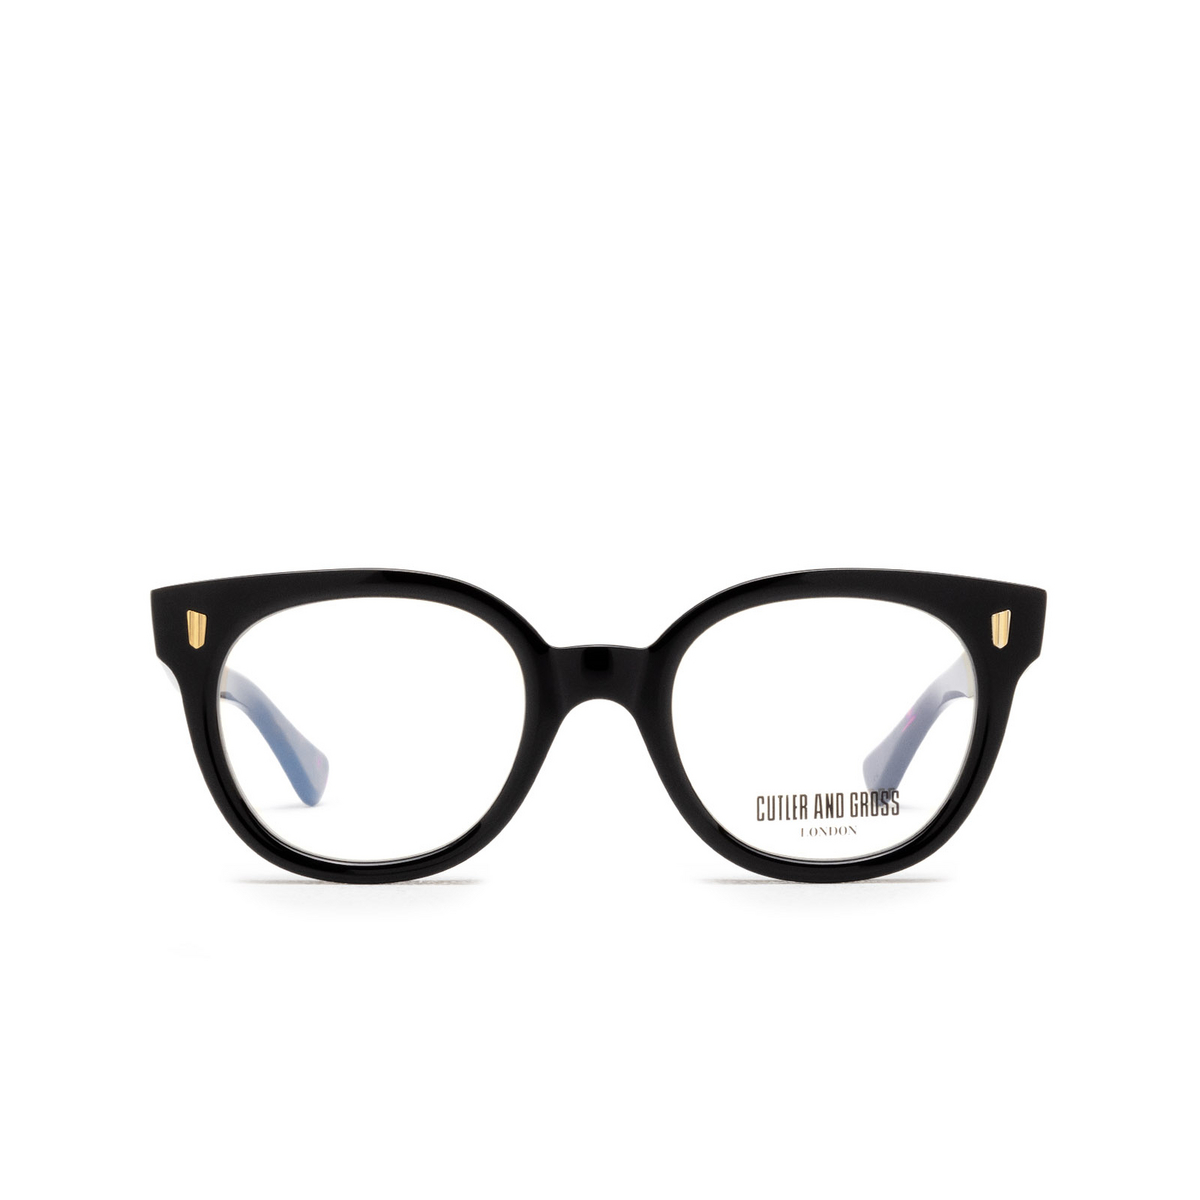 Cutler and Gross 9298 Eyeglasses 01 Black On Dark Turtle - front view